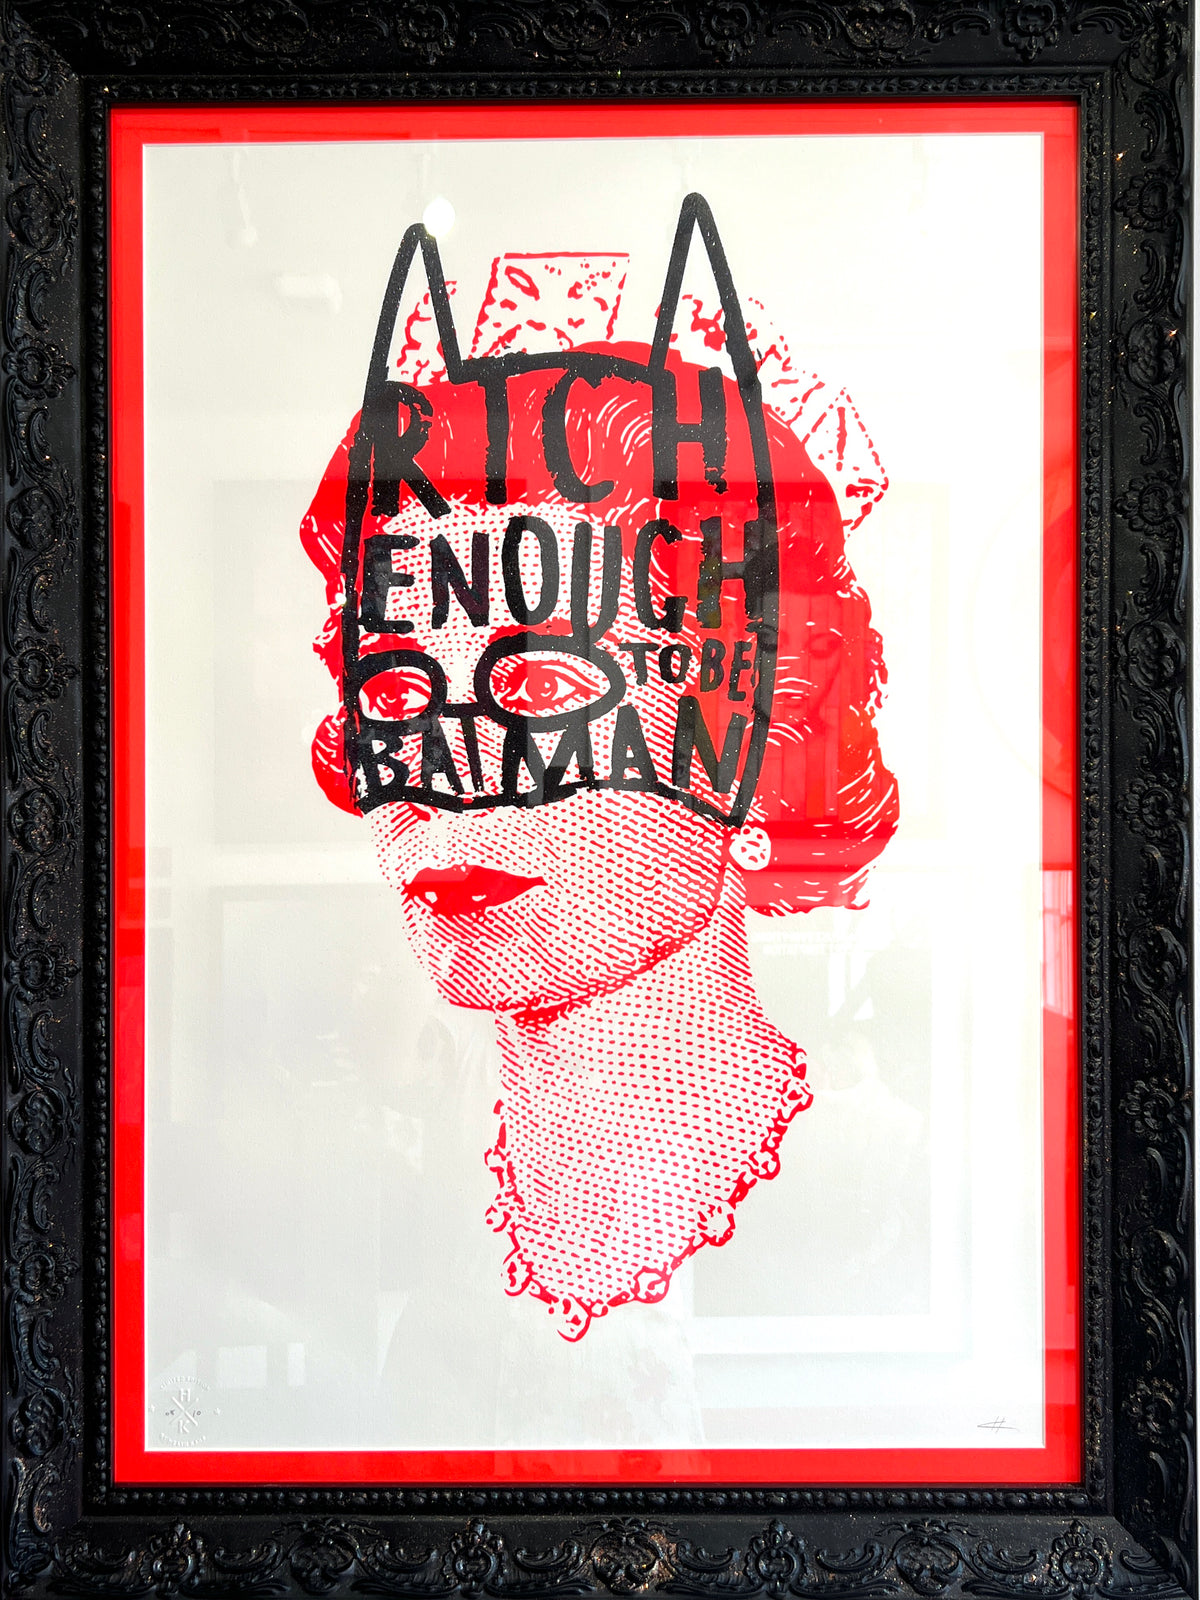 Rich Enough To Be Batman-Red with Glitter by Heath Kane